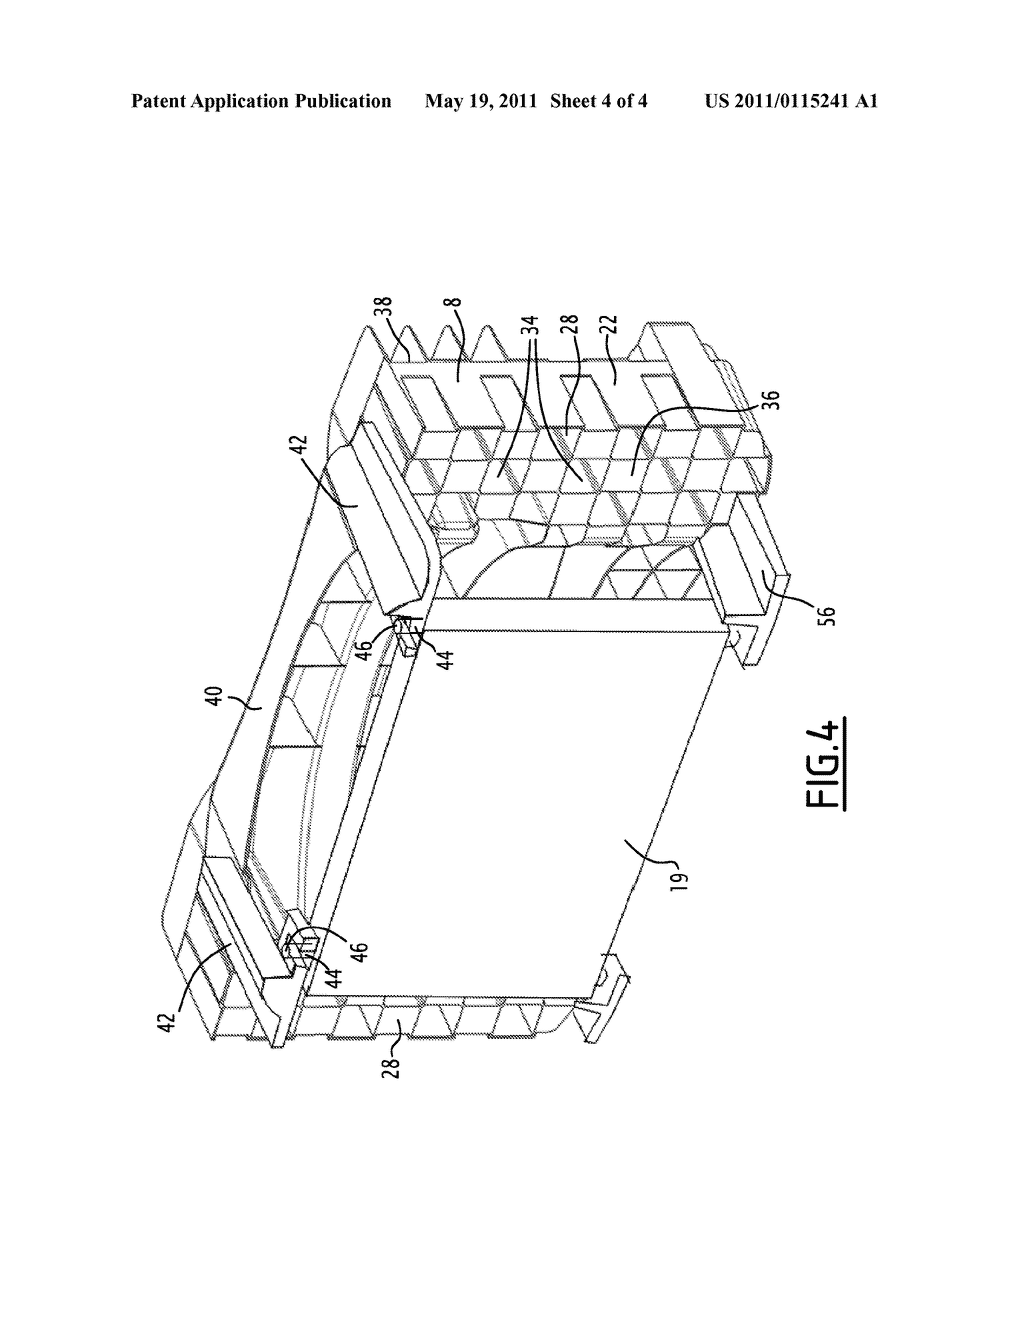 MOTOR VEHICLE FRONT ASSEMBLY COMPRISING A FRONT BUMPER SHIELD BEARING MEANS FOR ATTACHING AT LEAST ONE PIECE OF AUXILIARY EQUIPMENT OF THE MOTOR VEHICLE - diagram, schematic, and image 05